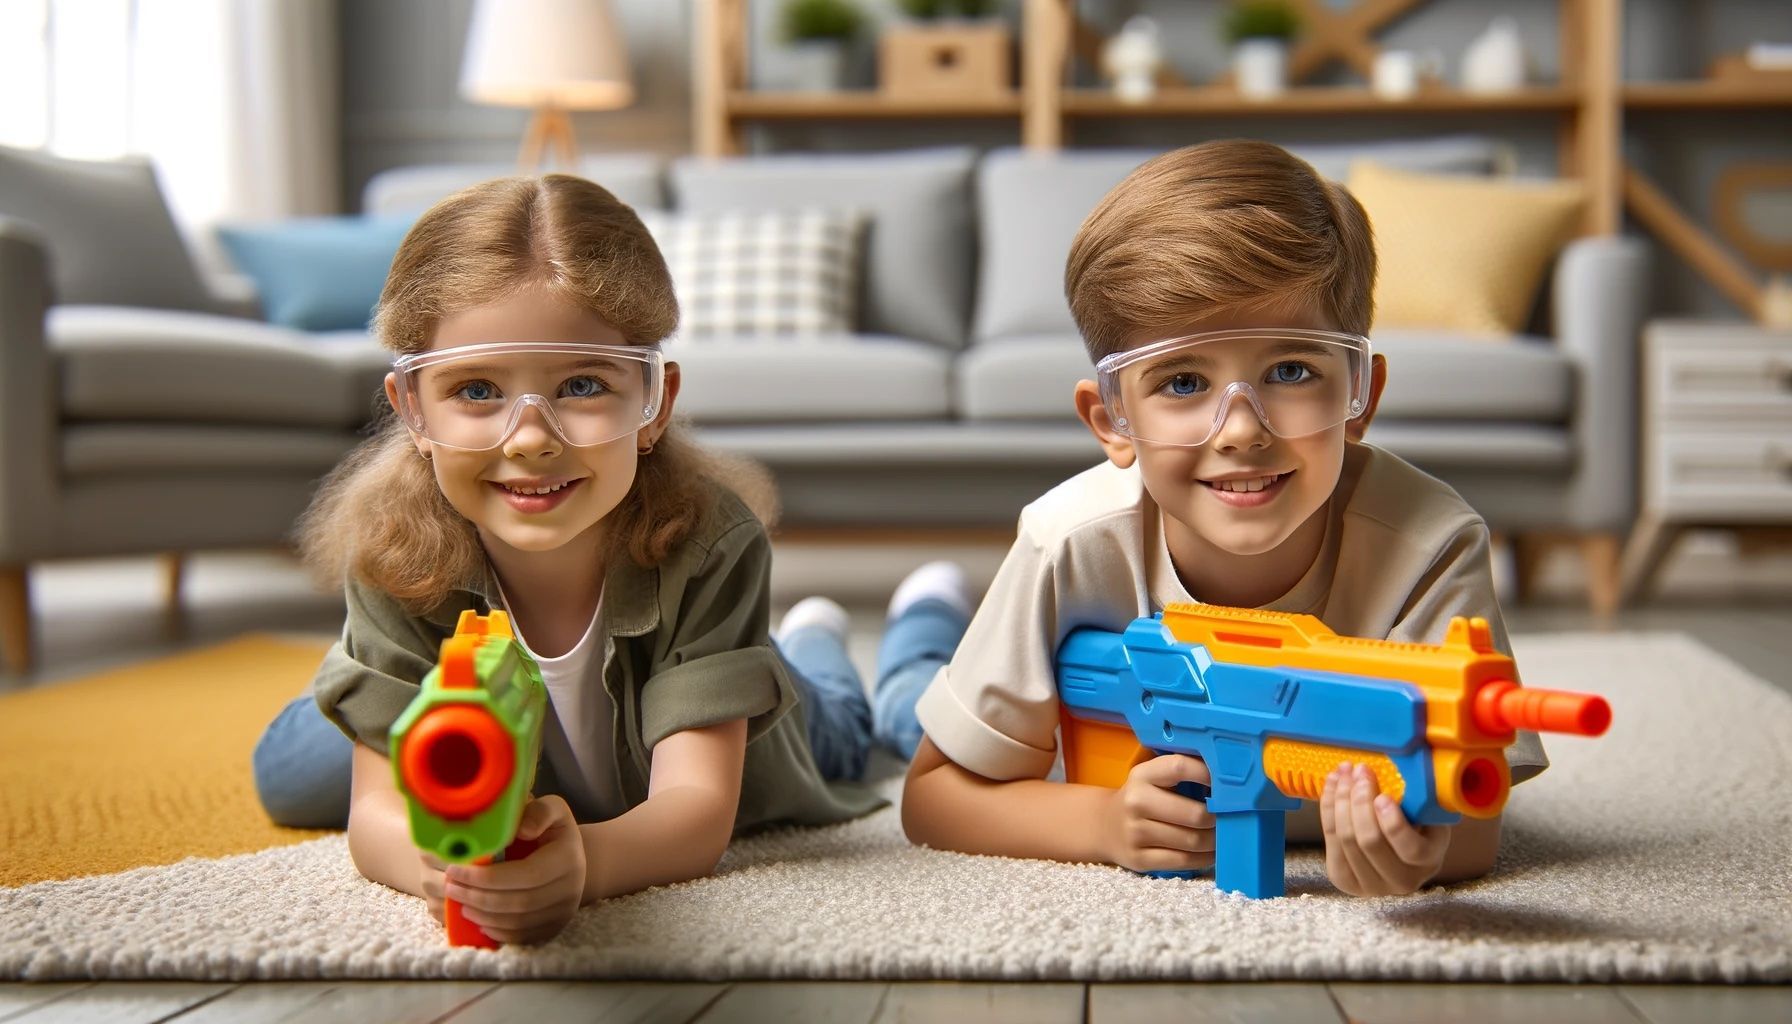 a young boy and girl playing with toy guns 